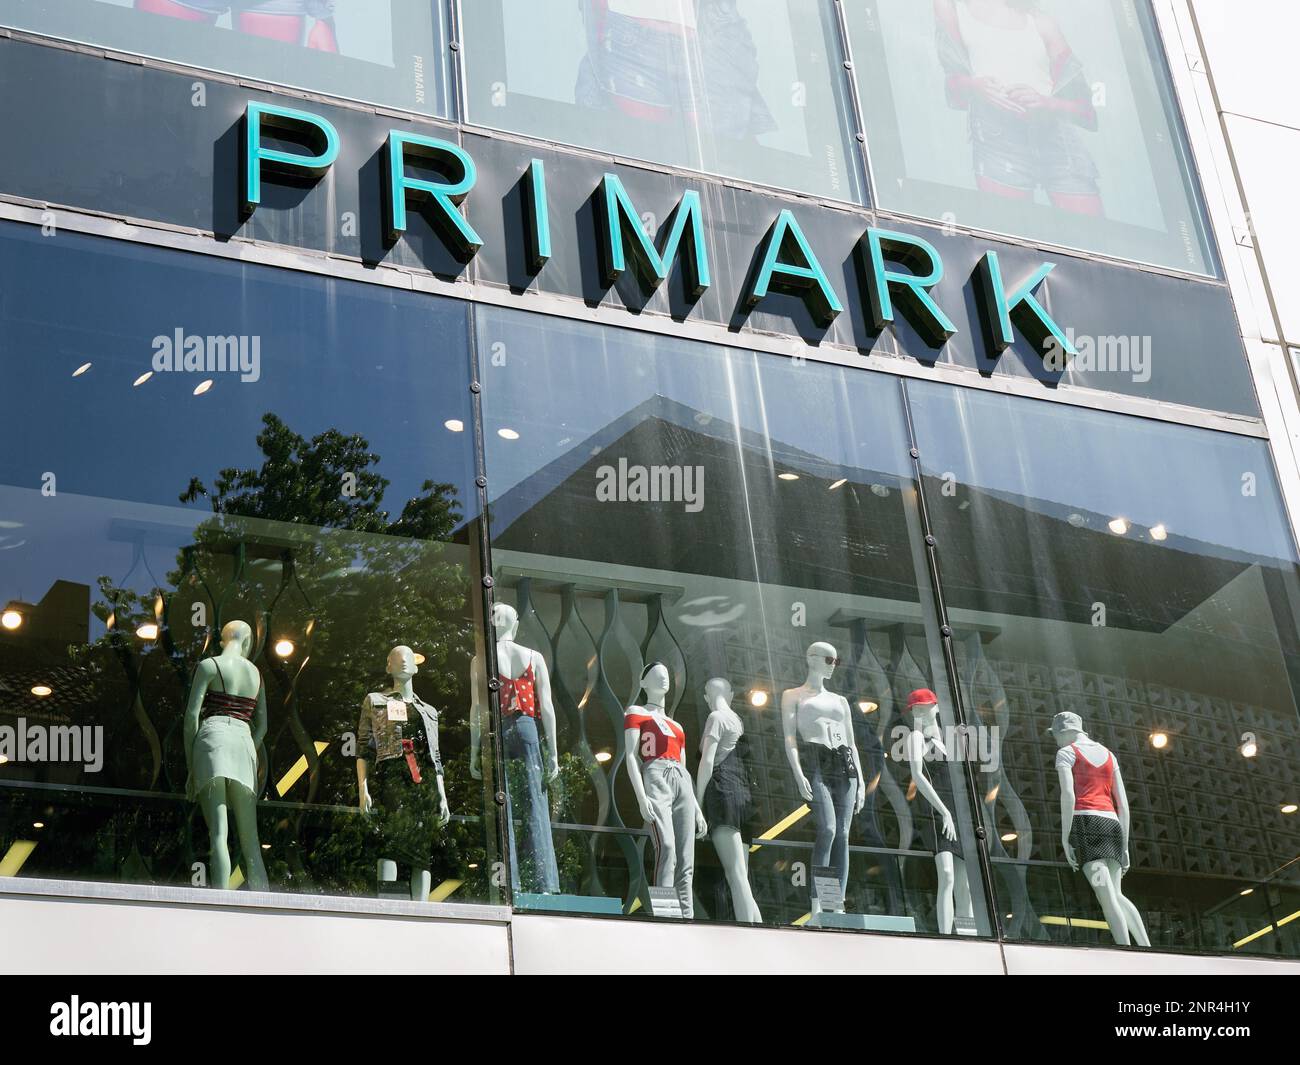 Hannover, Germany - May 7, 2018: Primark logo sign on storefront above shop window mannequins presenting their brand of fast fashion Stock Photo